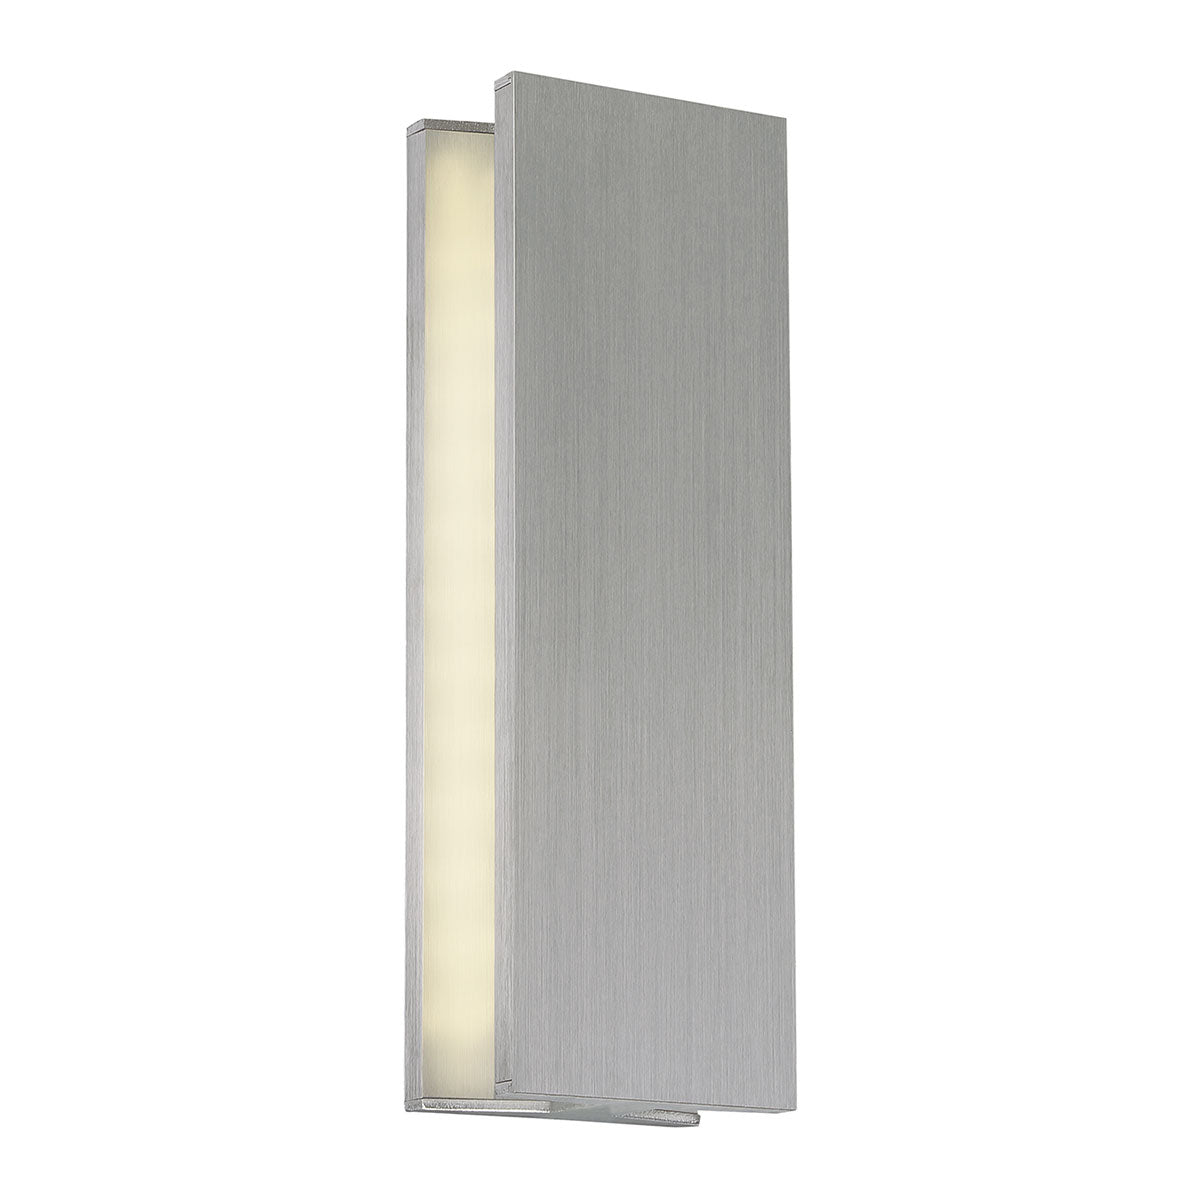 I-BEAM Sconce Aluminum INTEGRATED LED - WS-94614-AL | MODERN FORMS